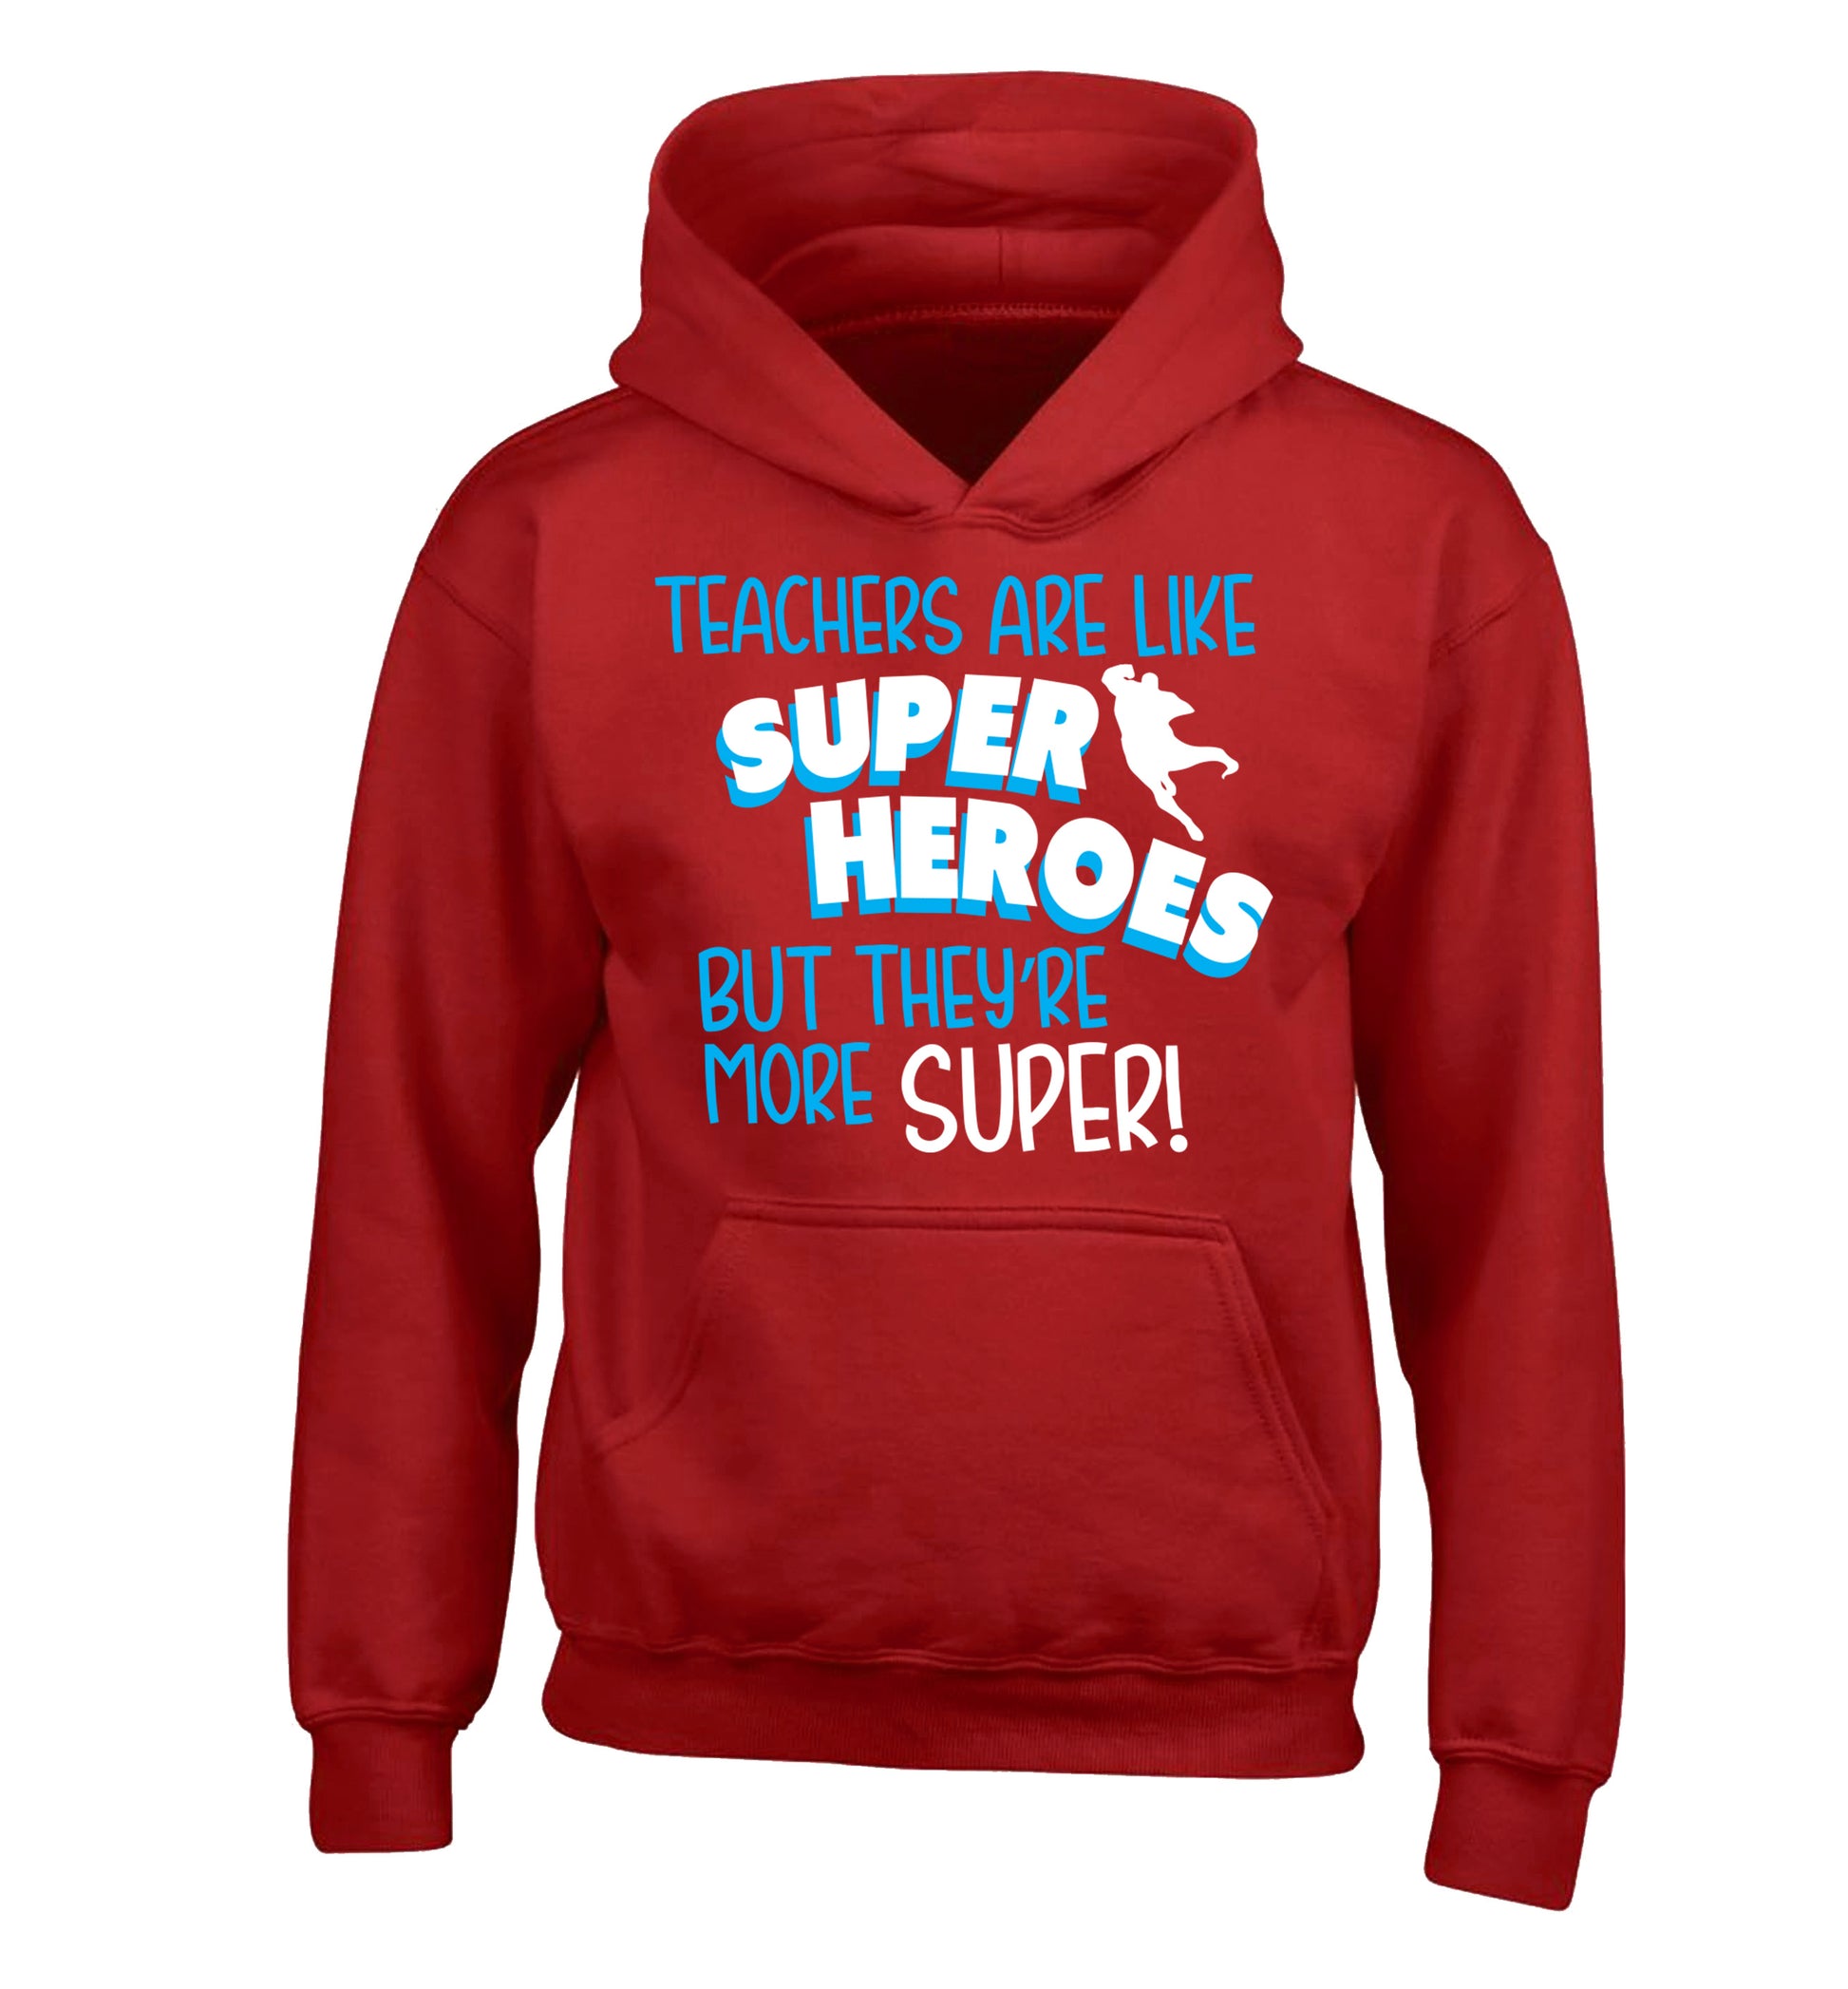 Teachers are like superheros but they're more super children's red hoodie 12-13 Years